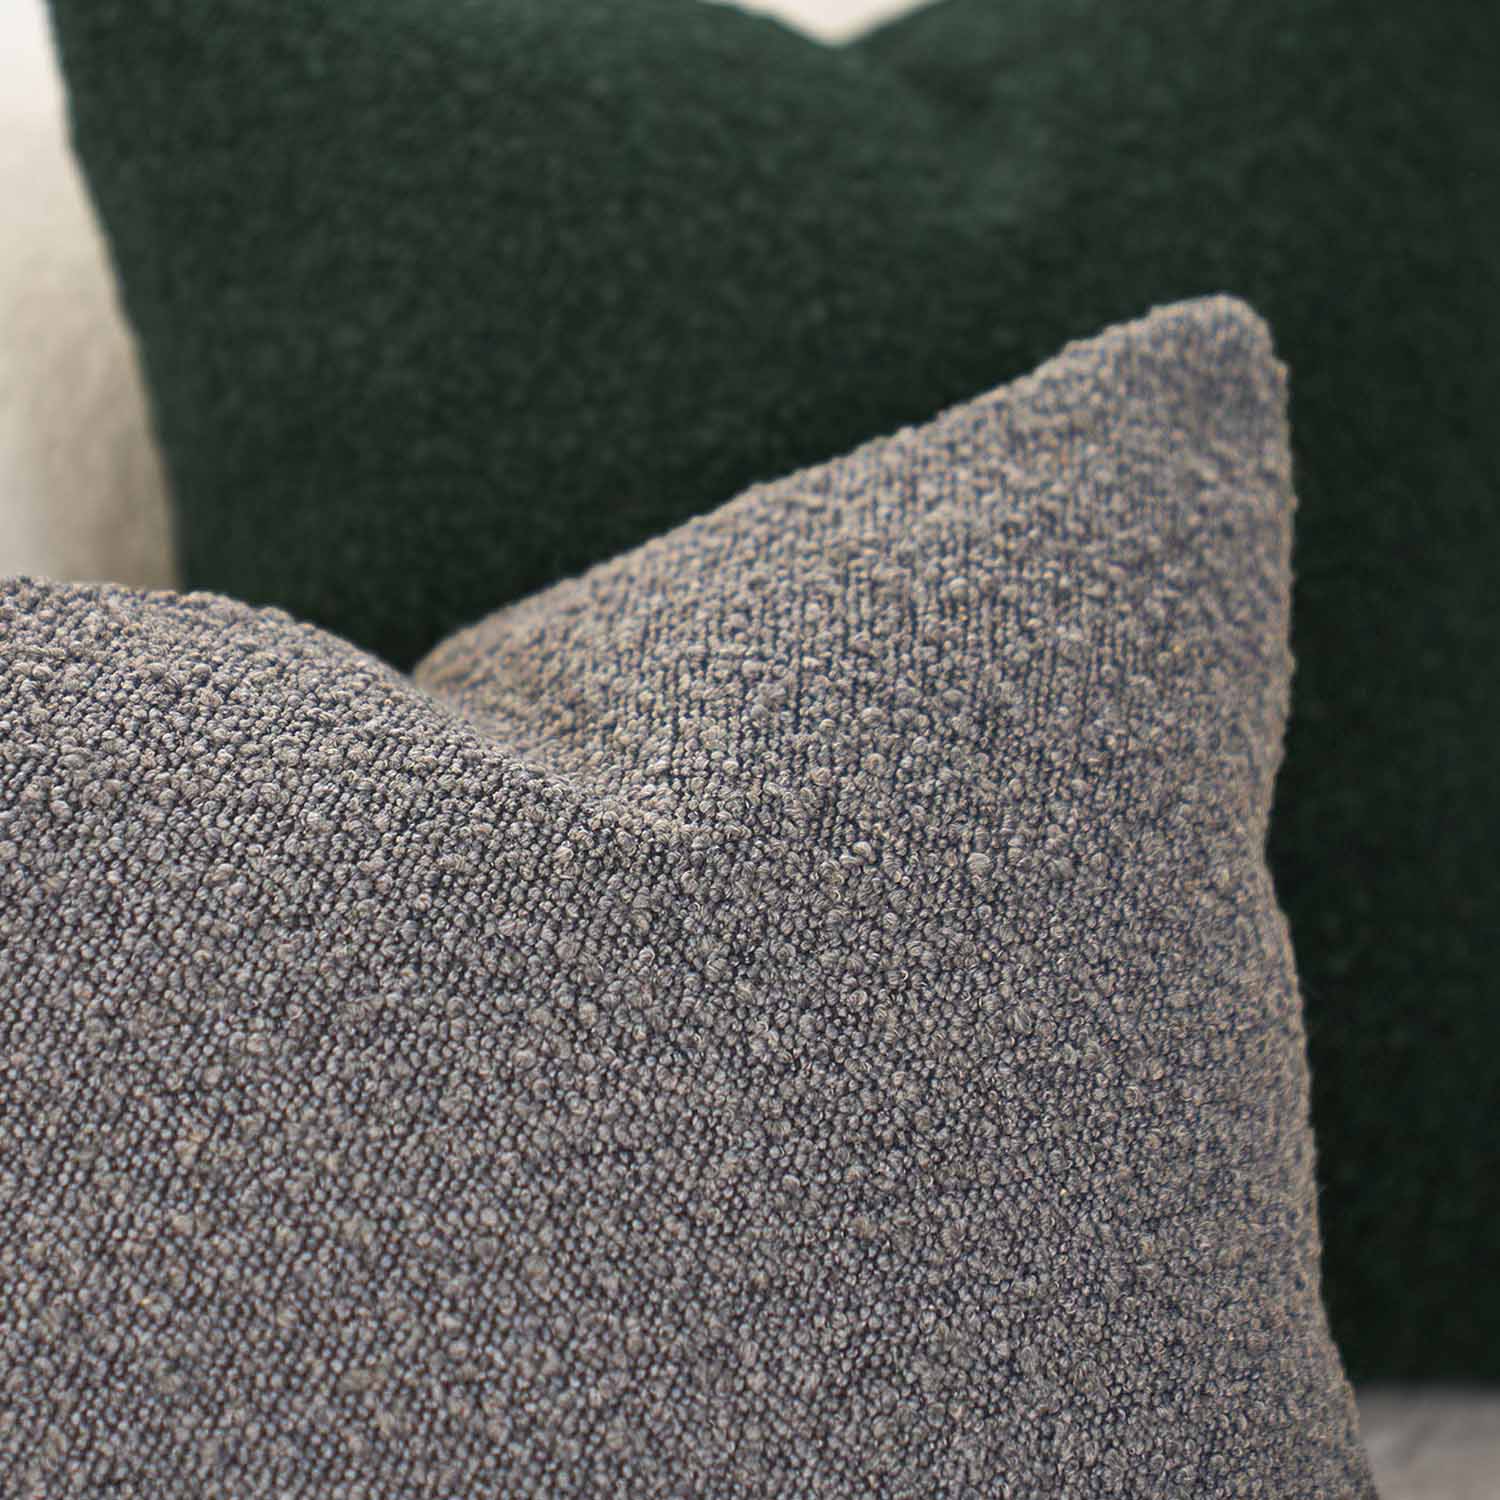 Castello Textured Boucle Pillow Cover-